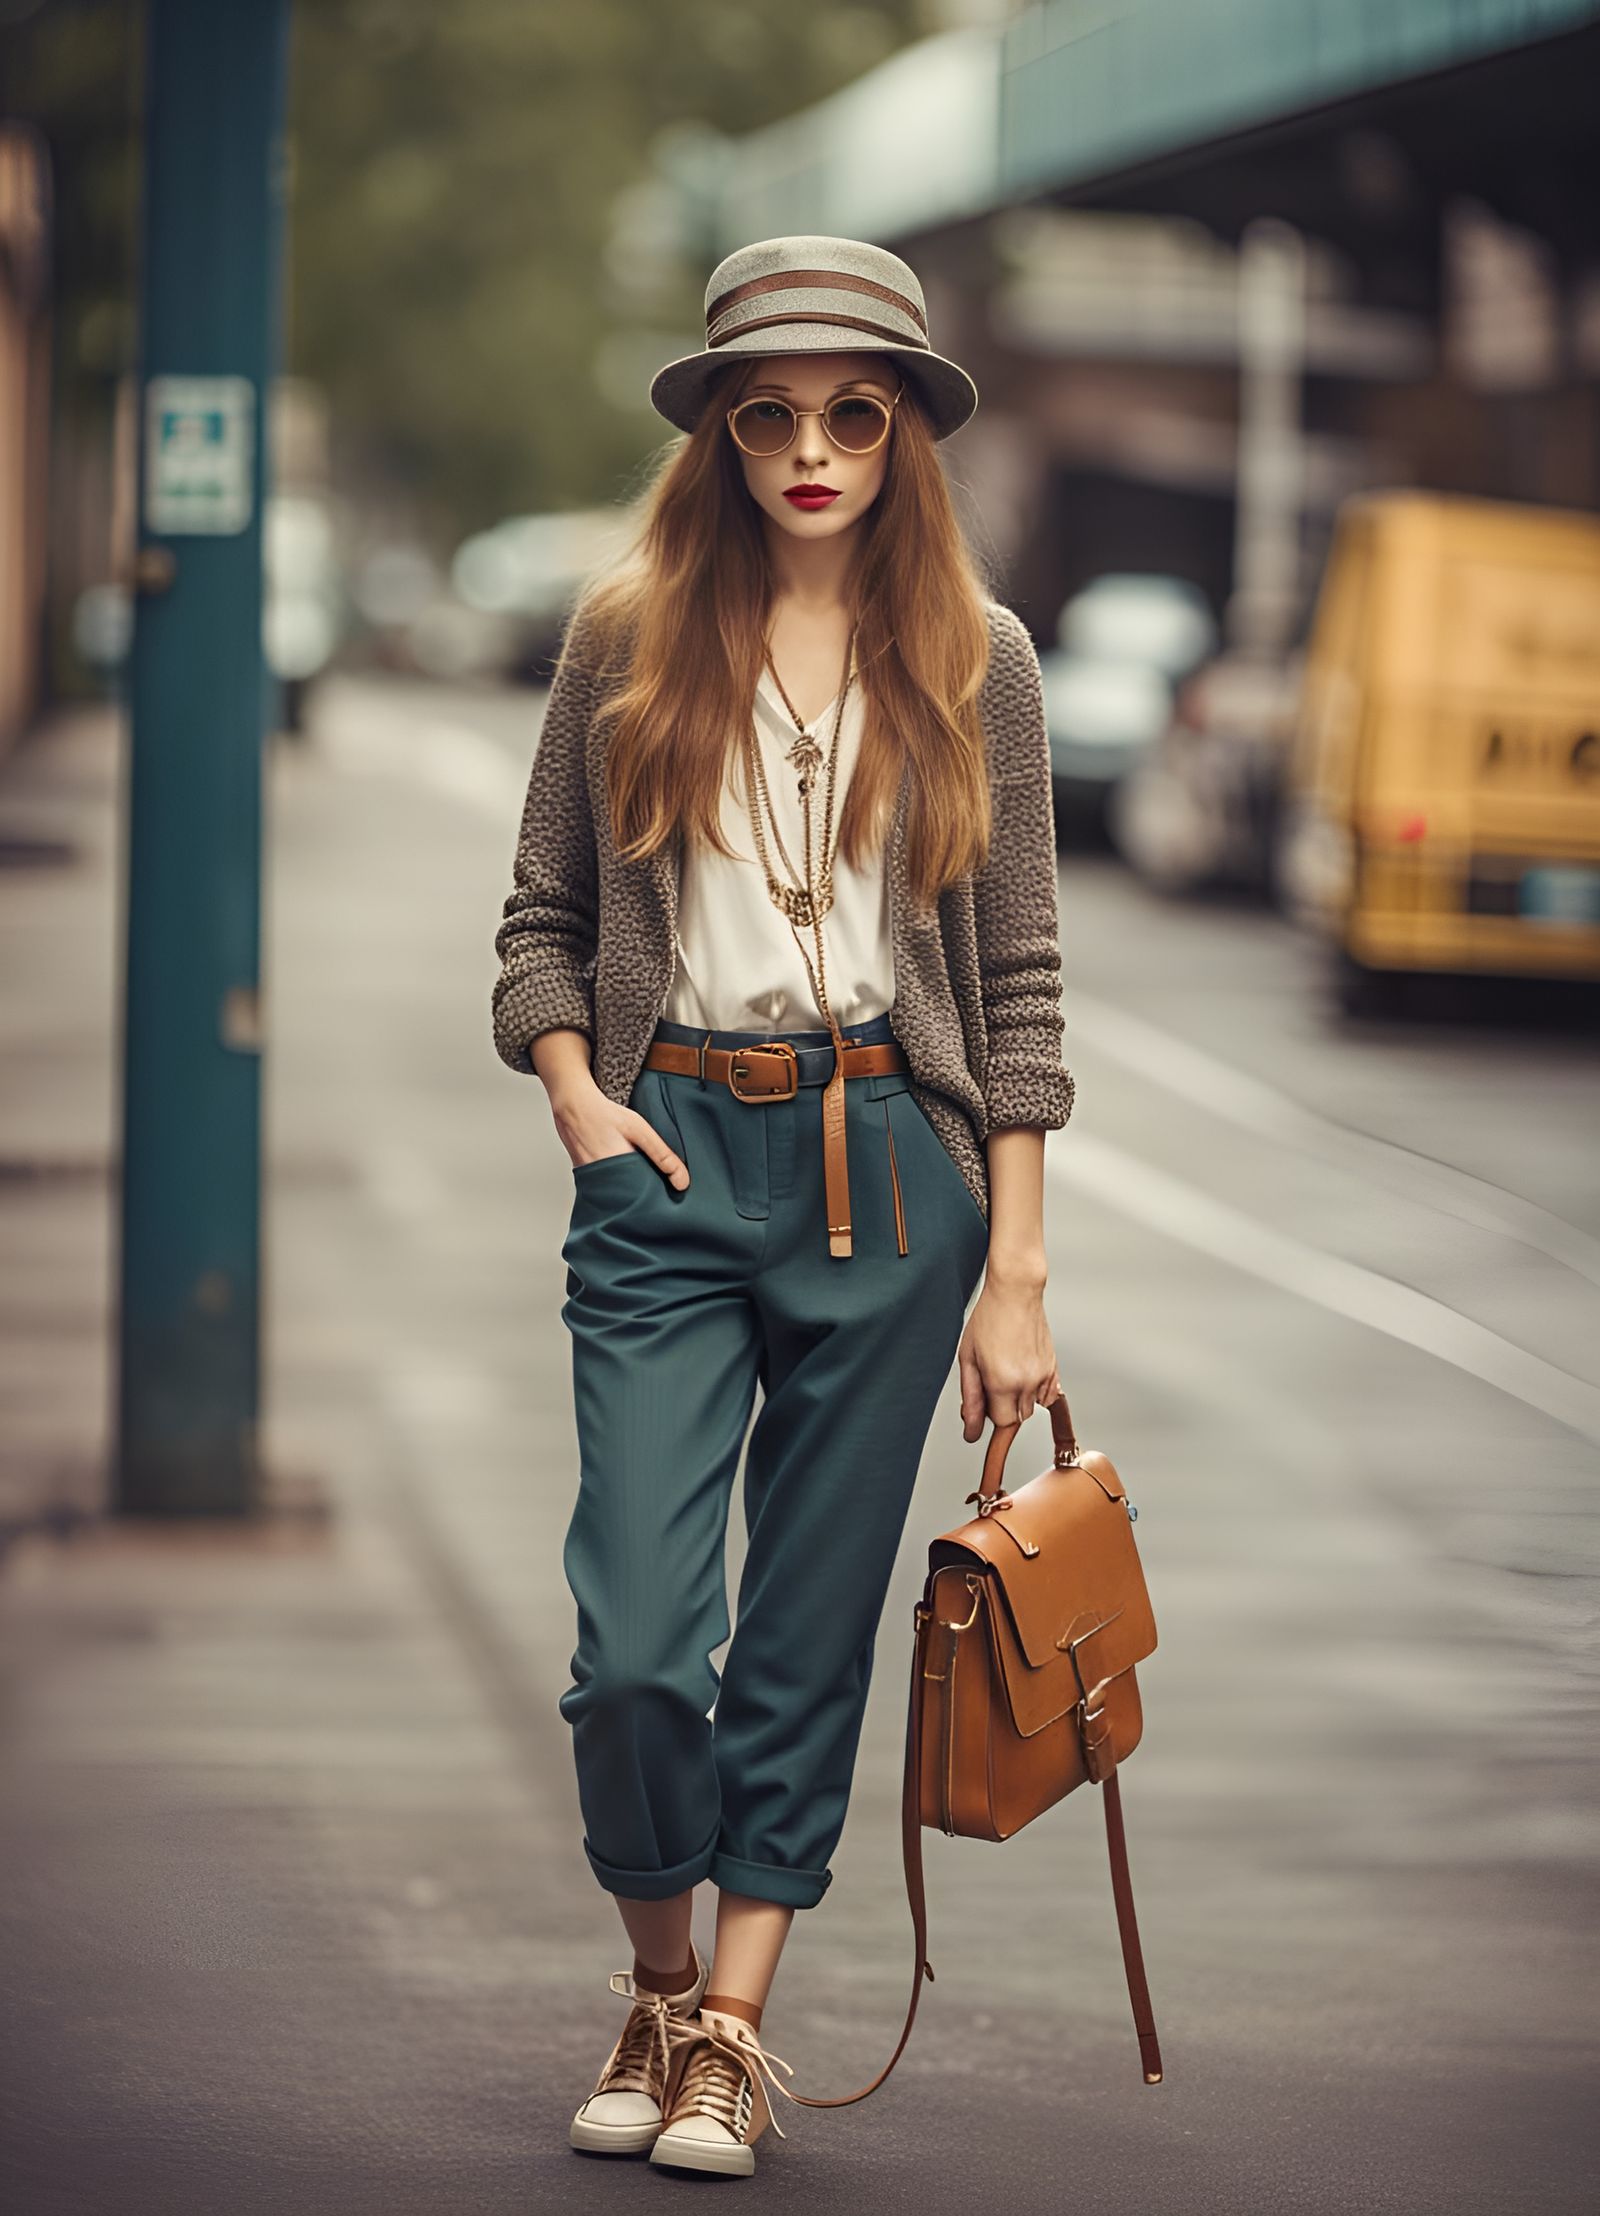 Hipster style: A bold and adventurous stunning fashion female : r